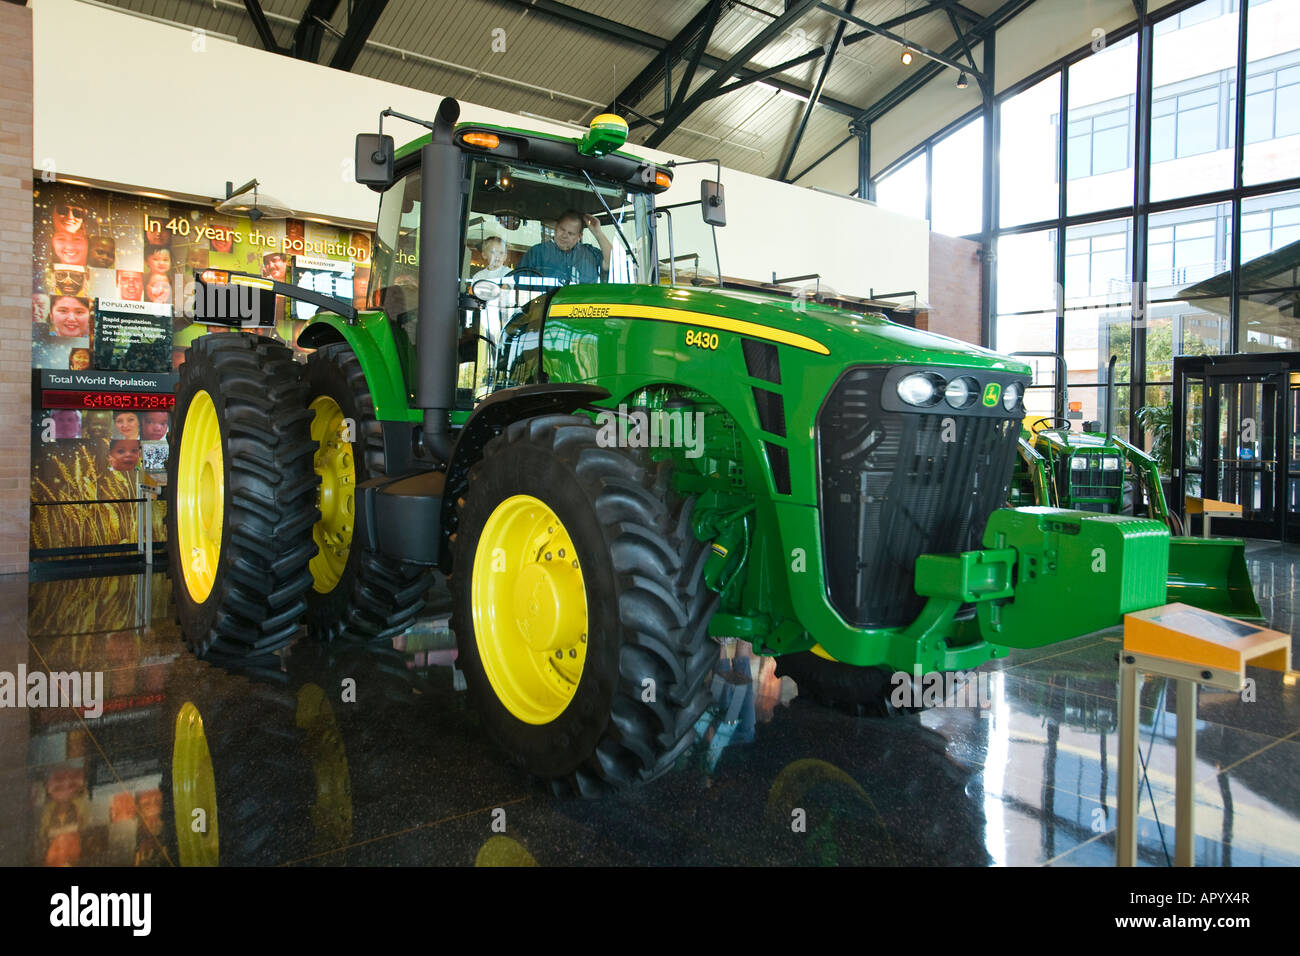 ILLINOIS Moline Man and son sit in cab John Deere tractor displayed in Pavilion farming and agricultural equipment Stock Photo